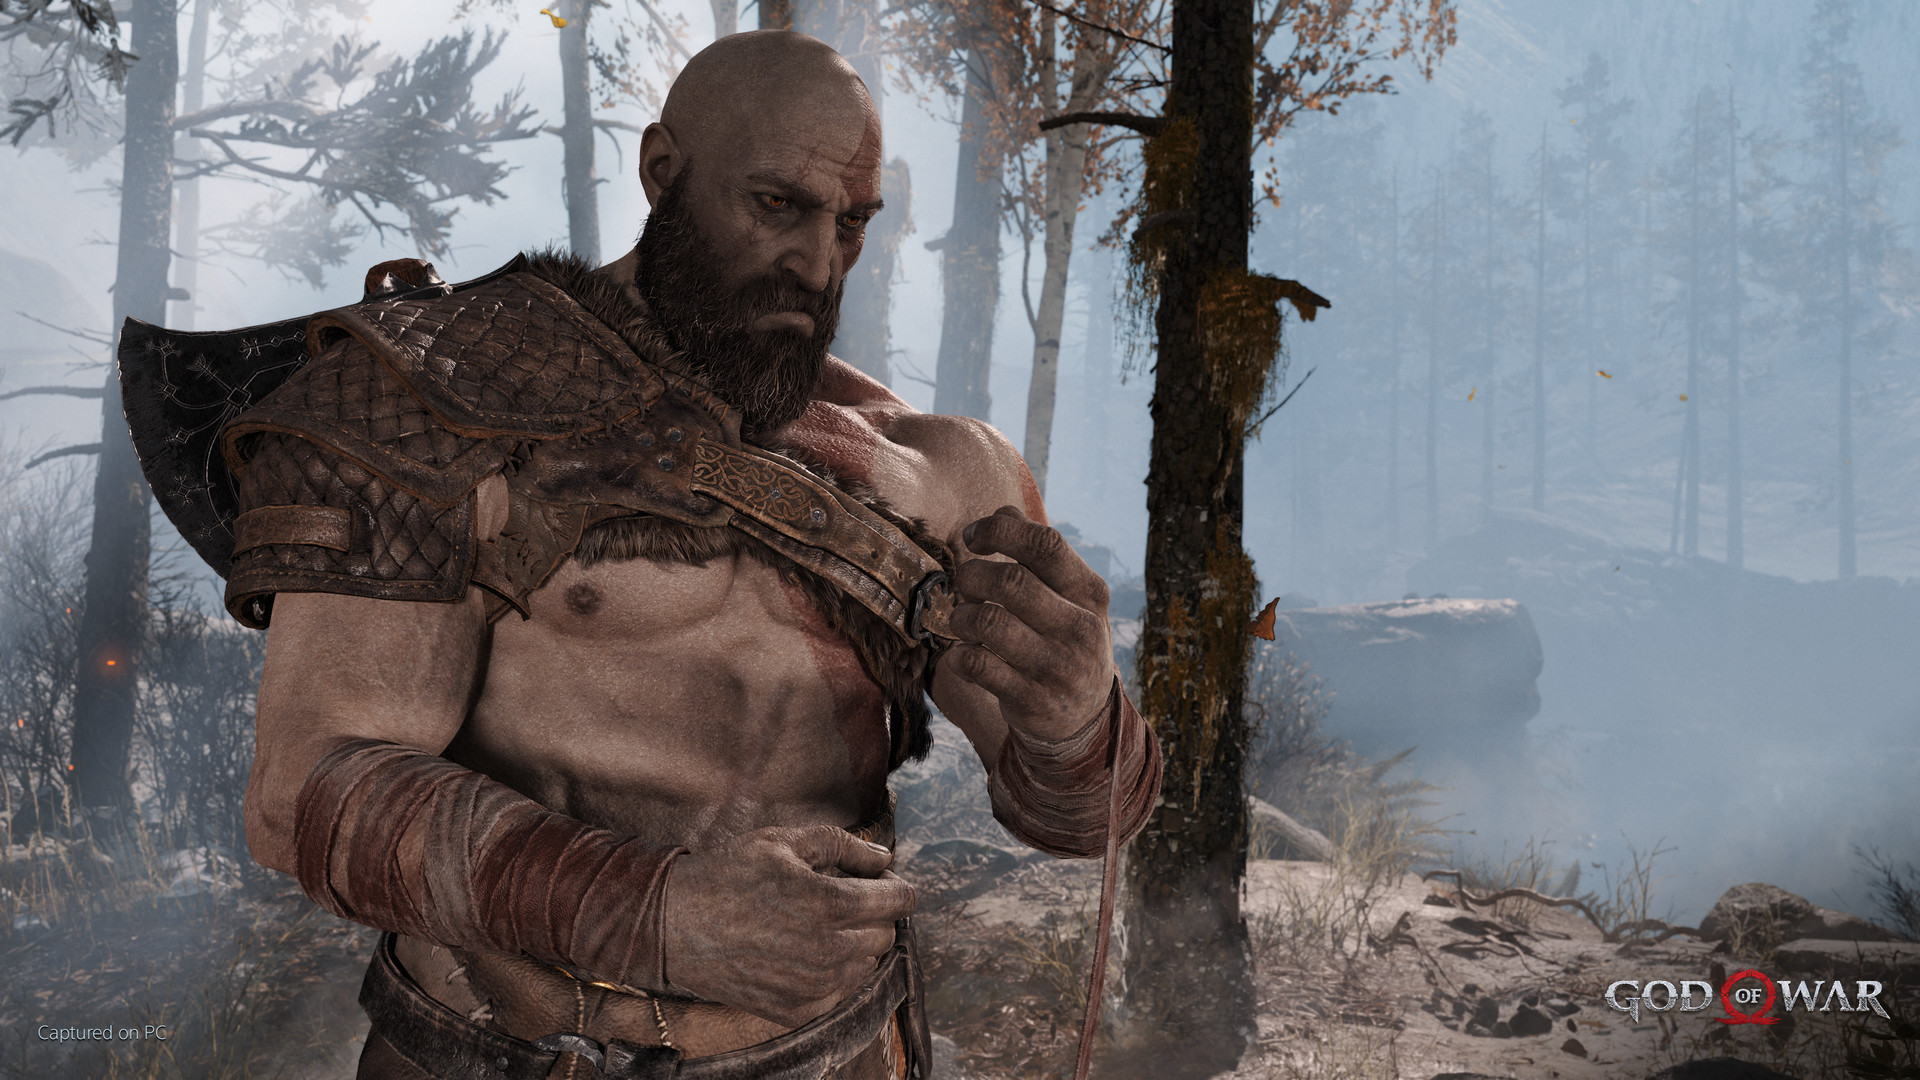 God of War PC Port Review, Discussion - Mouse and Keyboard: Why It's Great  